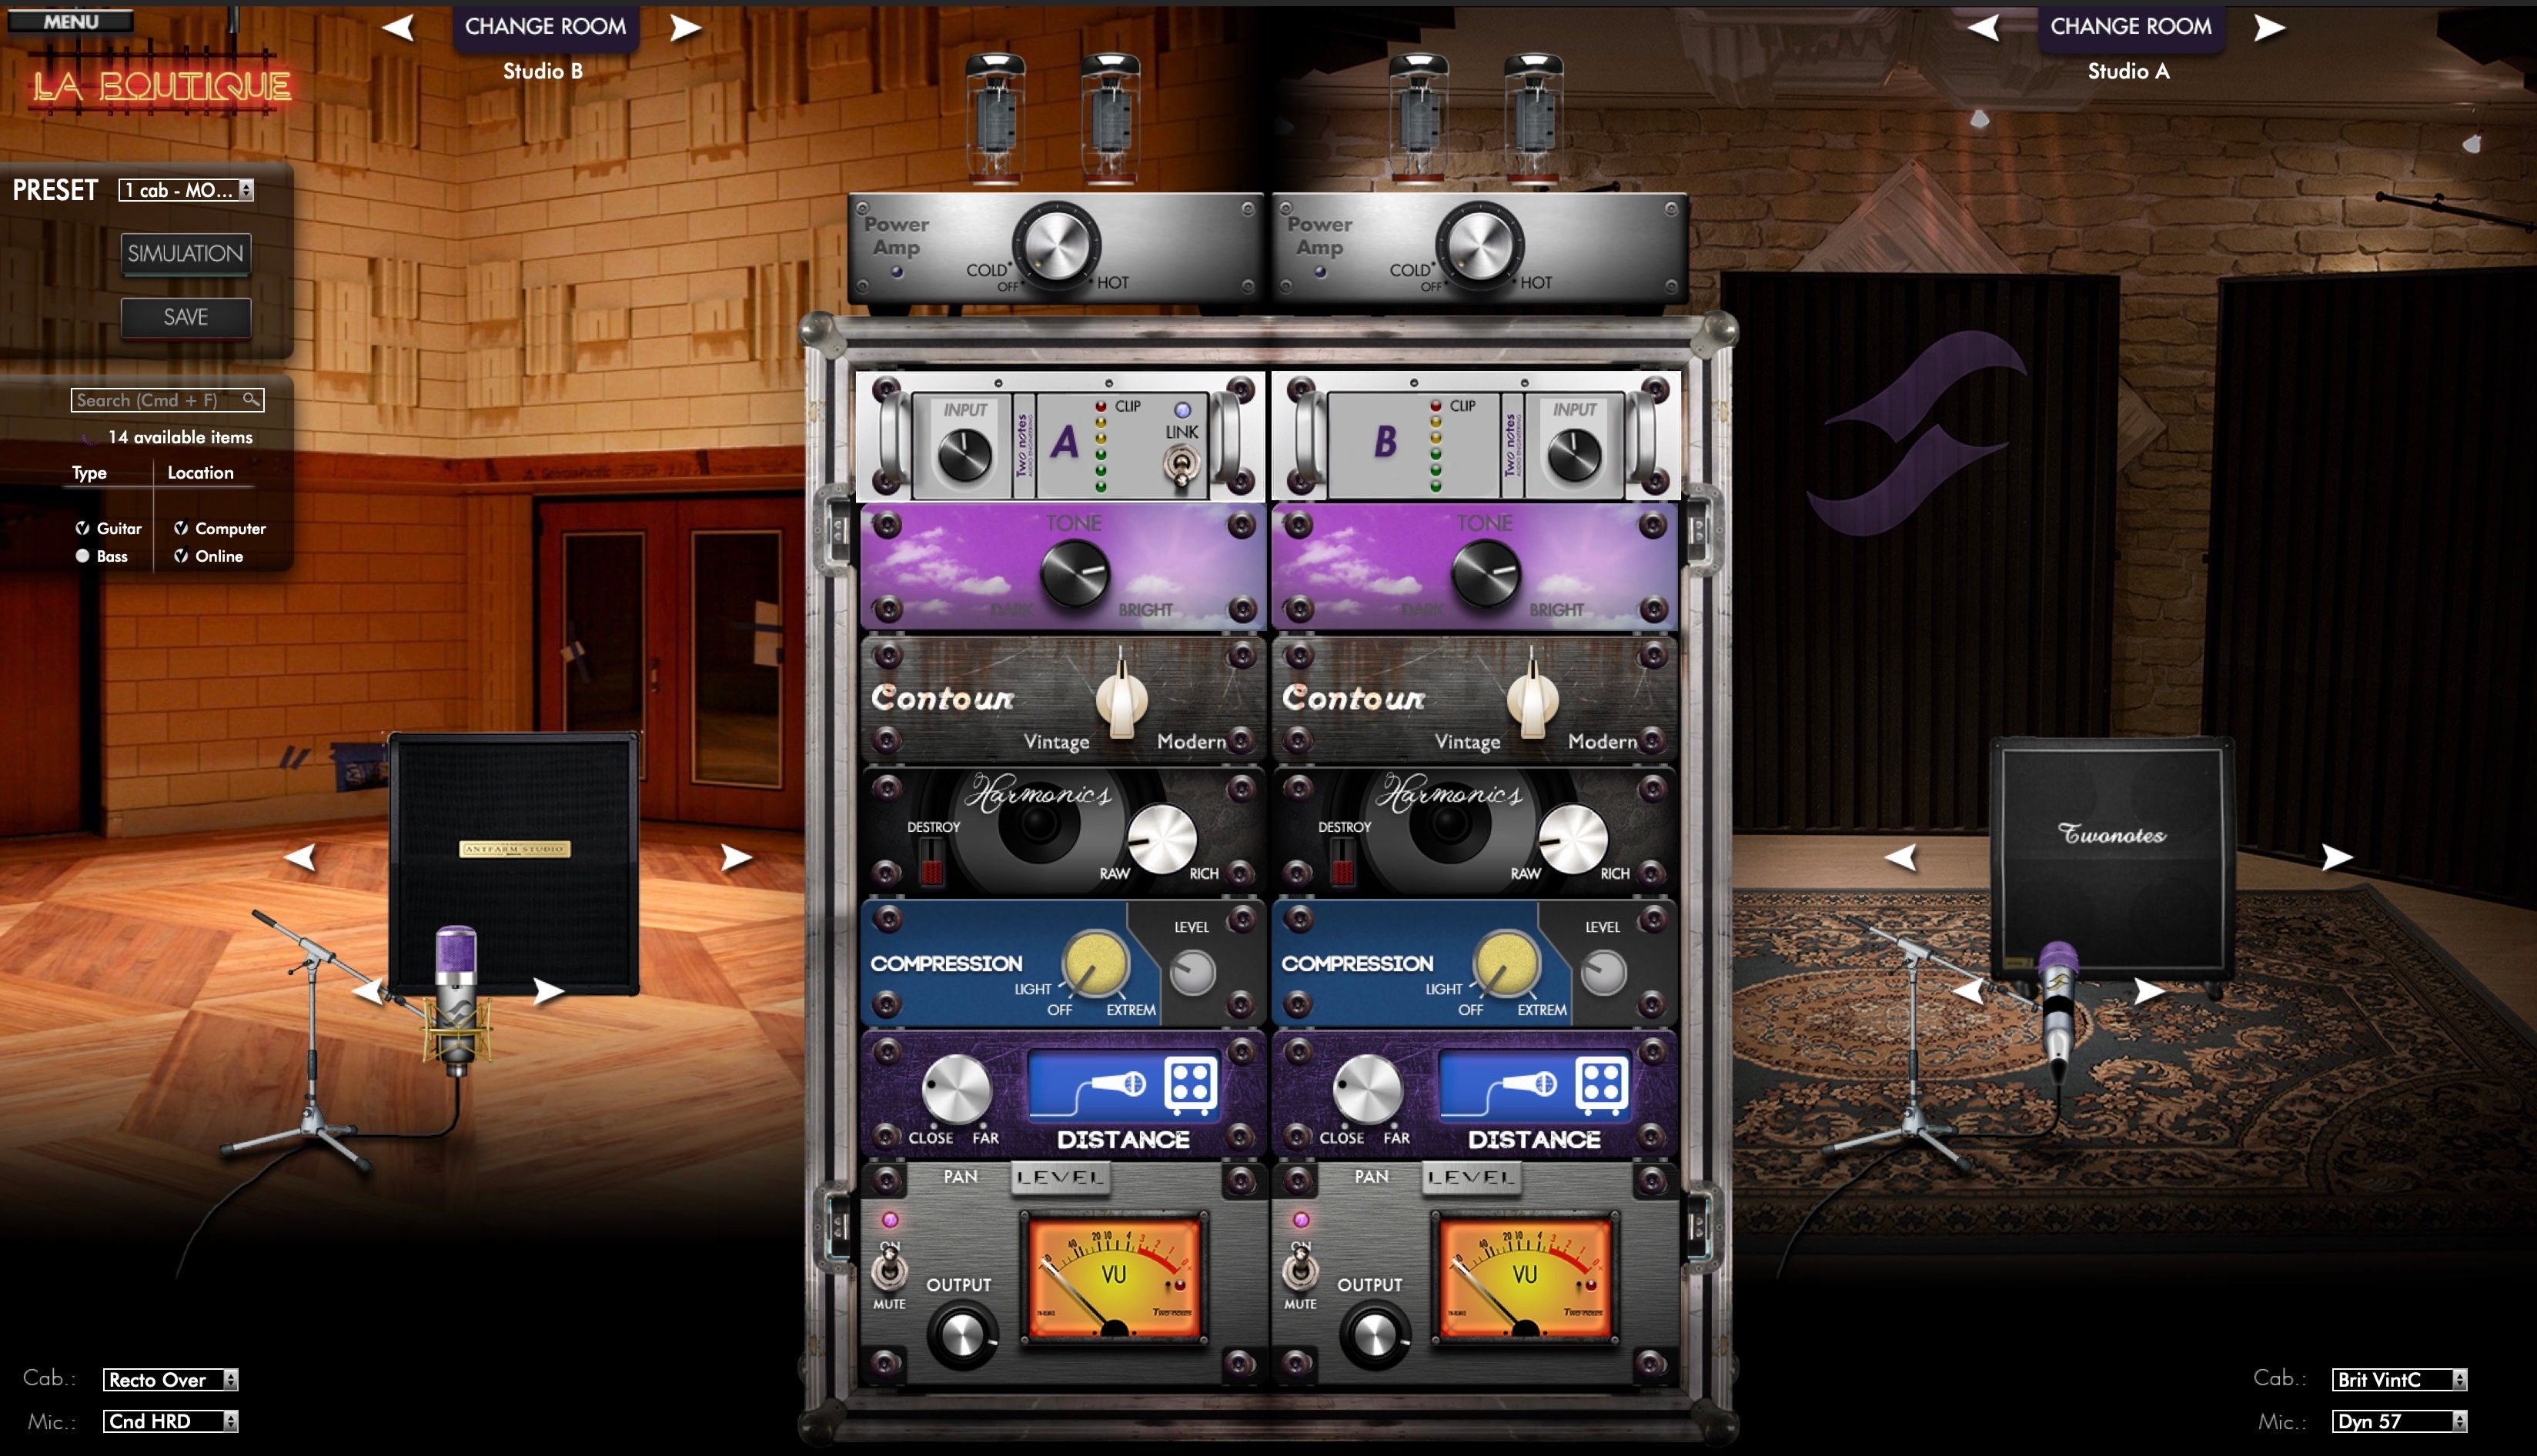 A screenshot of incredible tackiness. In the middle is a "rack" with various guitar effects on it (harmonics, compression, output), all with actual dials that you need to awkwardly move with the mouse in order to adjust. At the top of the rack is a "Power Amp" section that has actual vacuum tubes that light up if you turn the power dials up. To the left and right it shows the "room" that you're recording in, with a full-size photo and a little version of the speaker cabinet you've selected, and the microphone you've selected mounted on a stand.